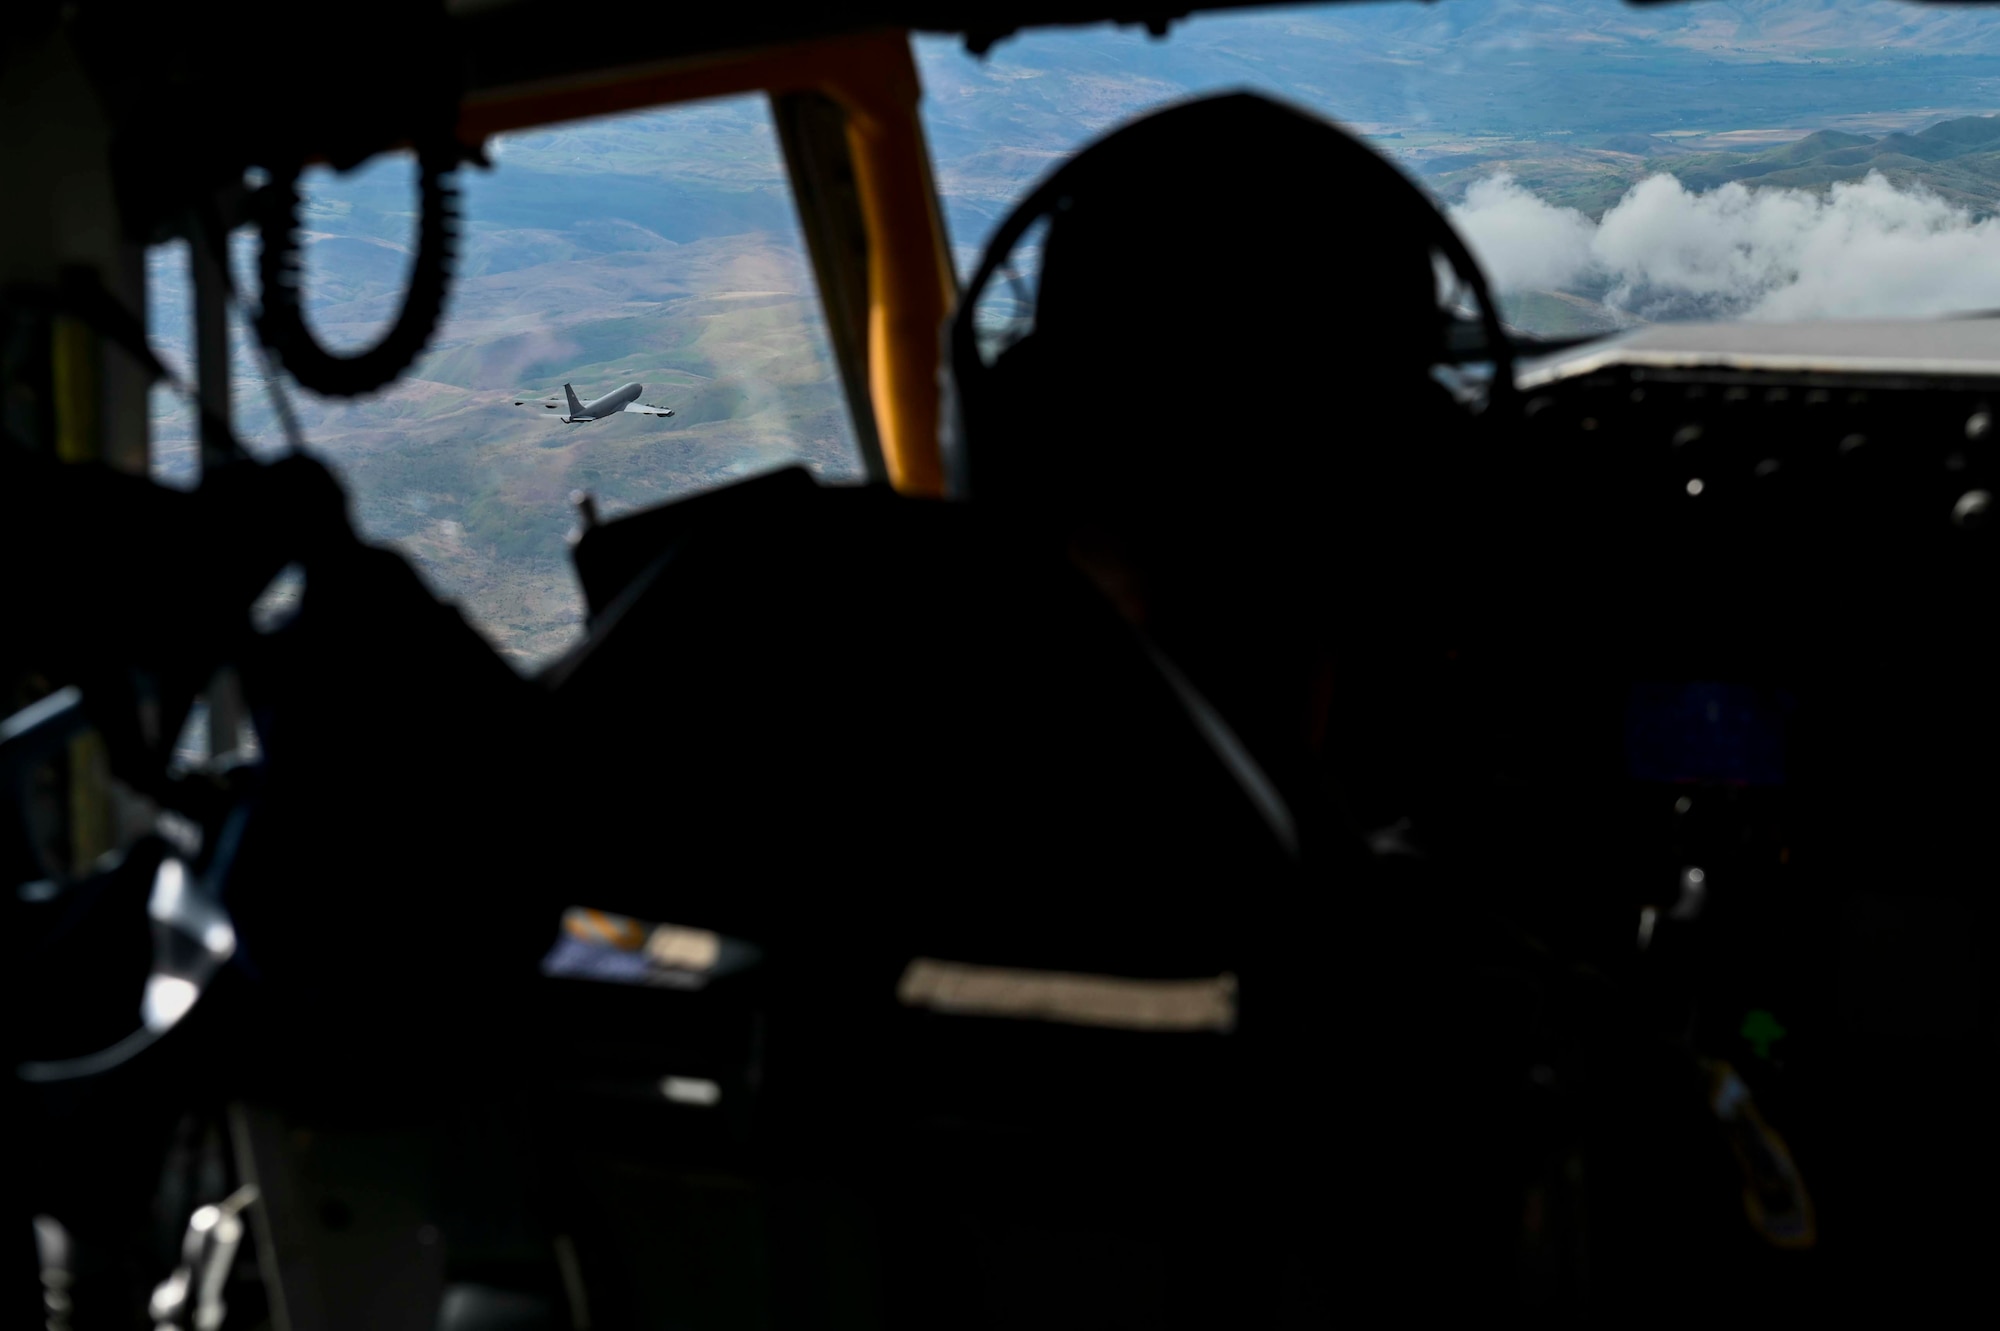 U.S. Air Force Lt. Col. Daniel Schone, a 92nd Air Refueling Squadron pilot, flies a KC-135 Stratotanker as part of Operation Centennial Contact out of Fairchild Air force Base, Wash., June 27, 2023. The movement, which included stops at Yellowstone National Park, Mount Rushmore, and Glacier National Park, was part of Air Mobility Command’s celebration of 100 years air refueling operations and demonstrated the 92nd Air Refueling Wing’s global reach capabilities. Since its inception in 1923, Air refueling has become a crucial component of military and civilian aviation operations around the world by extending the range and endurance of aircraft and enabling them to complete missions that would otherwise be impossible or require multiple stops. As a result, this capability is essential for strategic and tactical operations, as well as humanitarian relief efforts in support of AMC, U.S. Transportation Command and Department of Defense priorities. (U.S. Air Force photo by Airman 1st Class Haiden Morris)